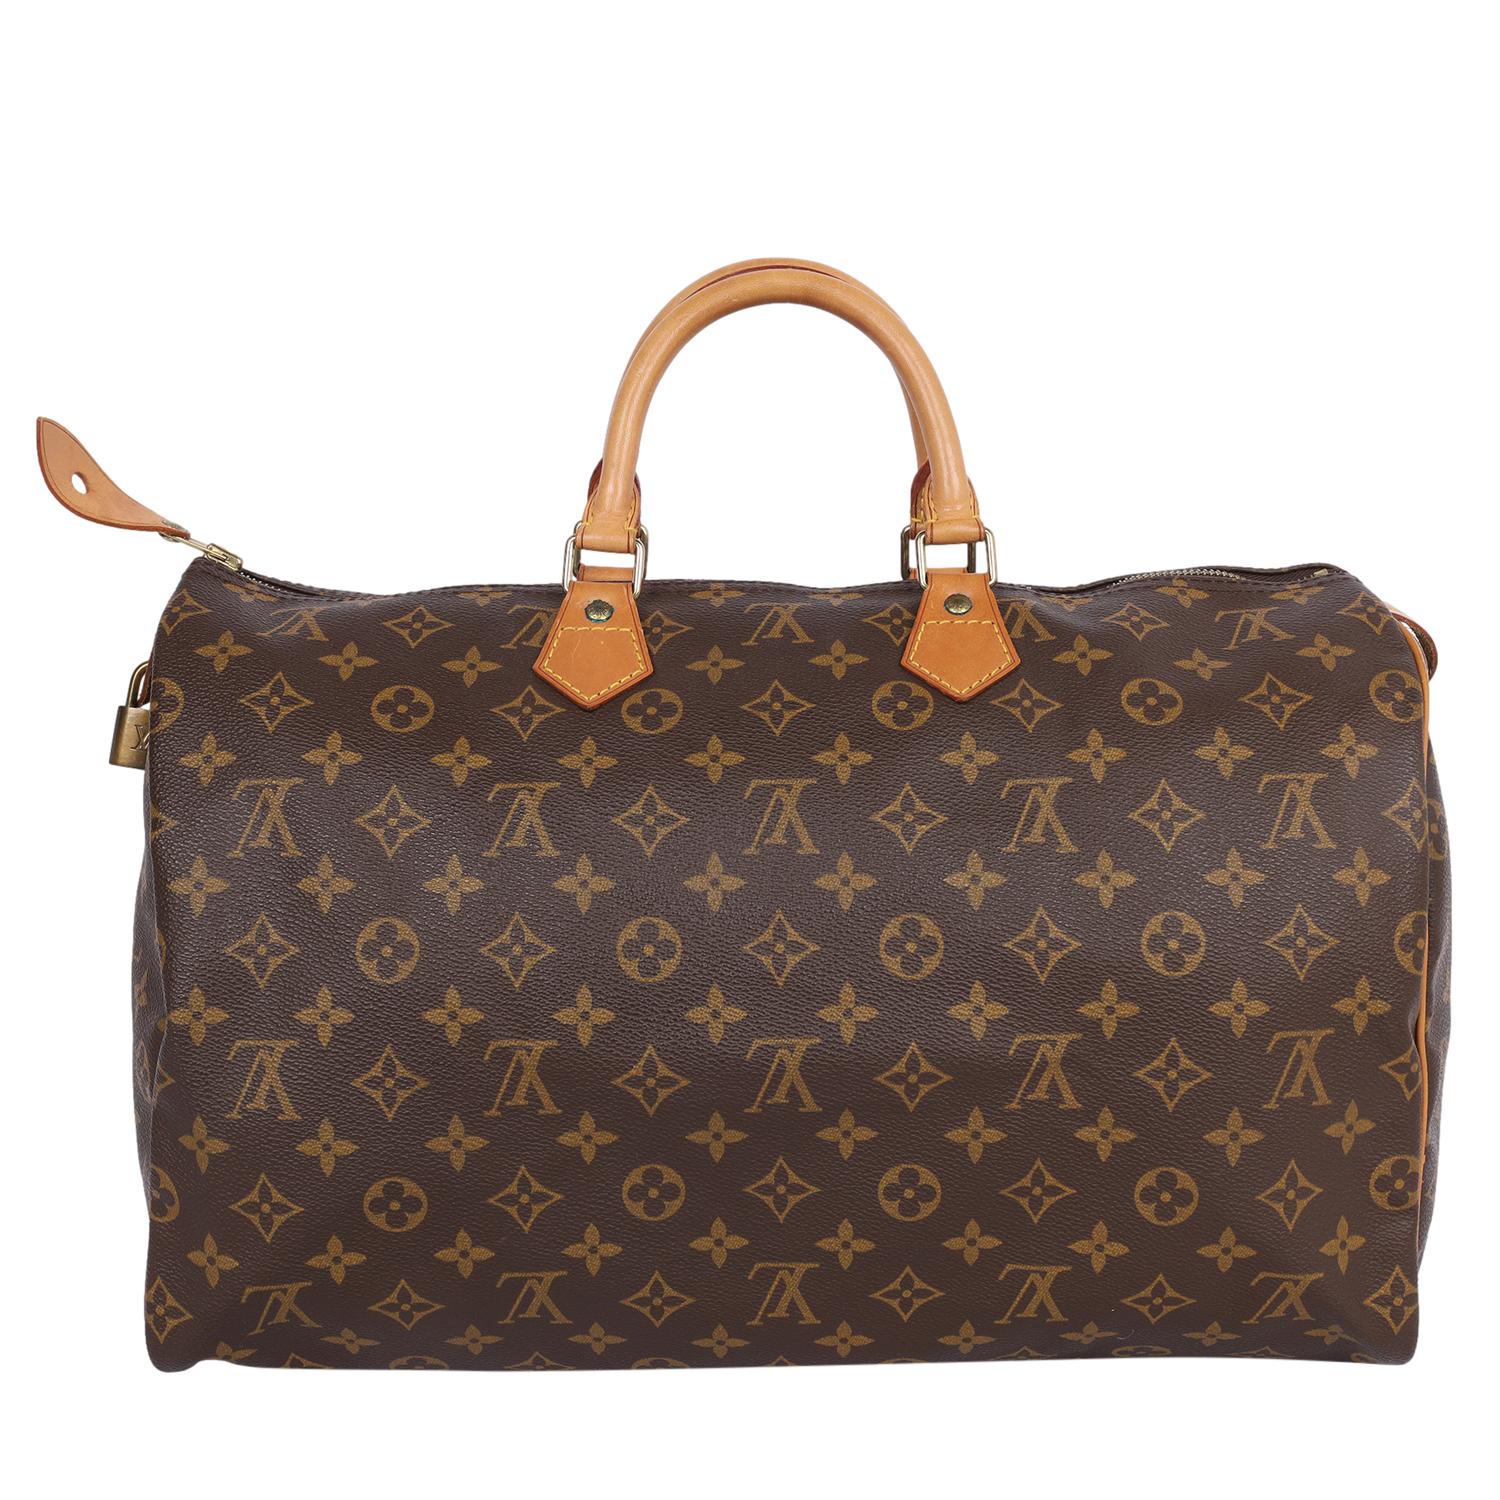 Authentic, pre-loved Louis Vuitton brown monogram Speedy 40 Satchel. The perfect day bag to travel bag. Add a strap and use this great bag as a shoulder or cross-body bag. Features monogram canvas, dual leather handles, zipper top closure, and brown